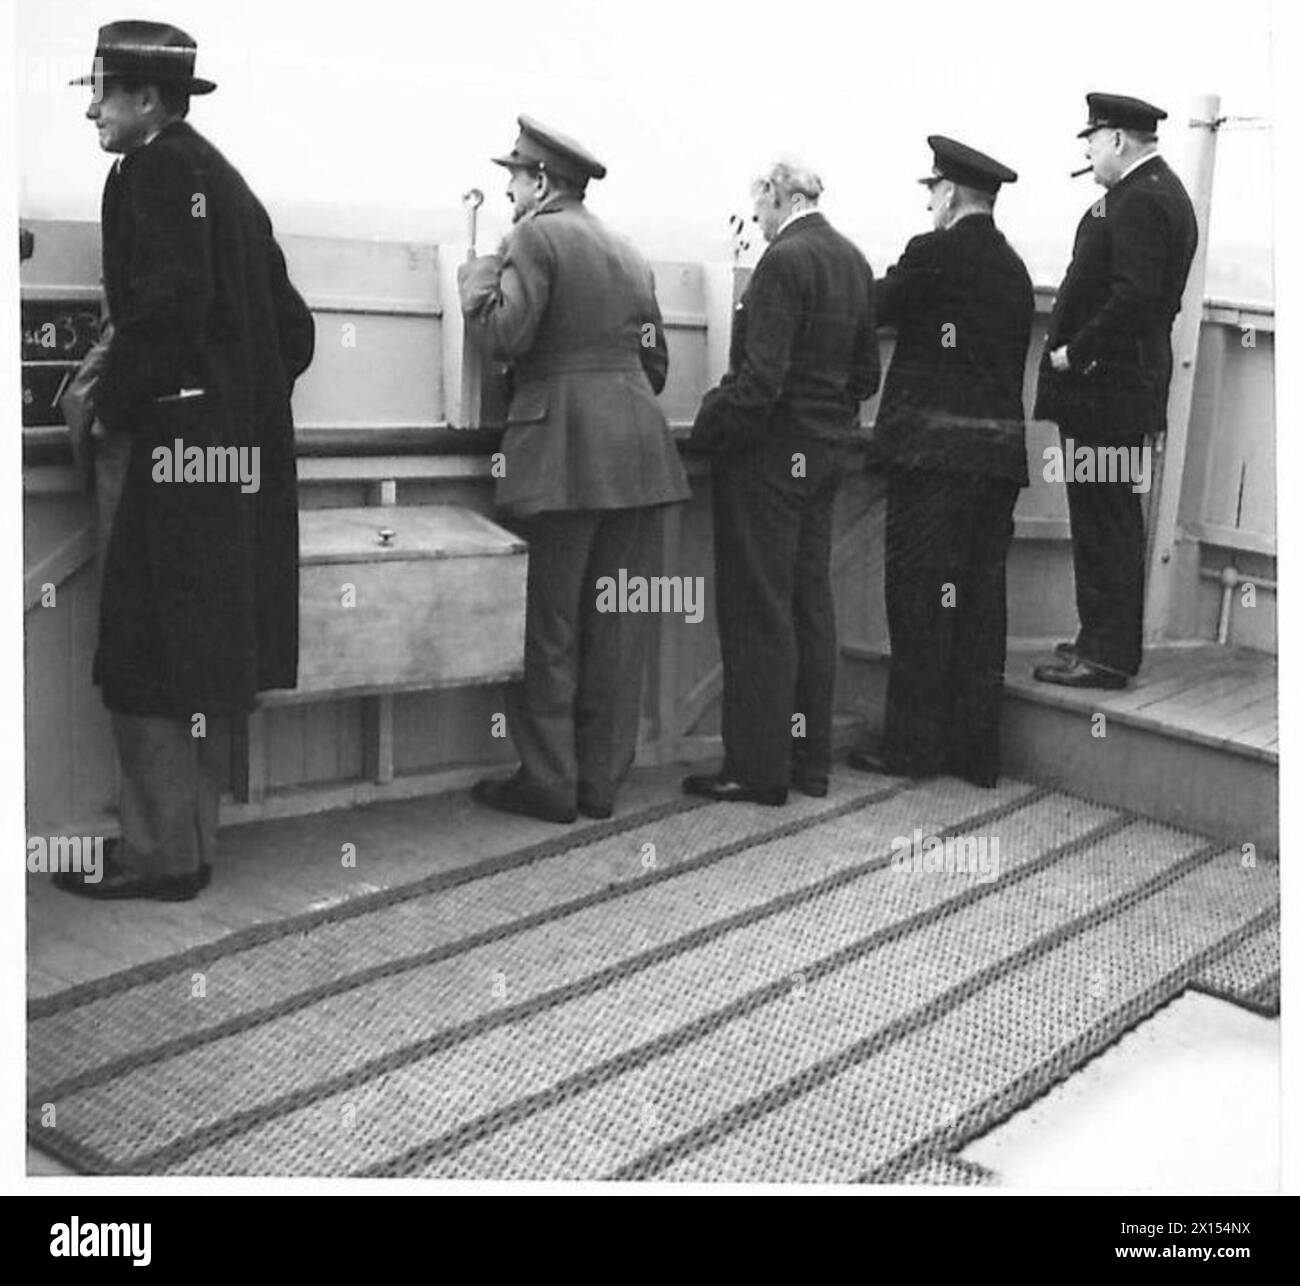 MR. CHURCHILL ARRIVES IN CANADA - Mr. Harrison, General Sir Alan Brooke, Lord Moran, Admiral Sir Dudley Pound and the Prime Minister, watching the ship berth on arrival in Canada British Army Stock Photo